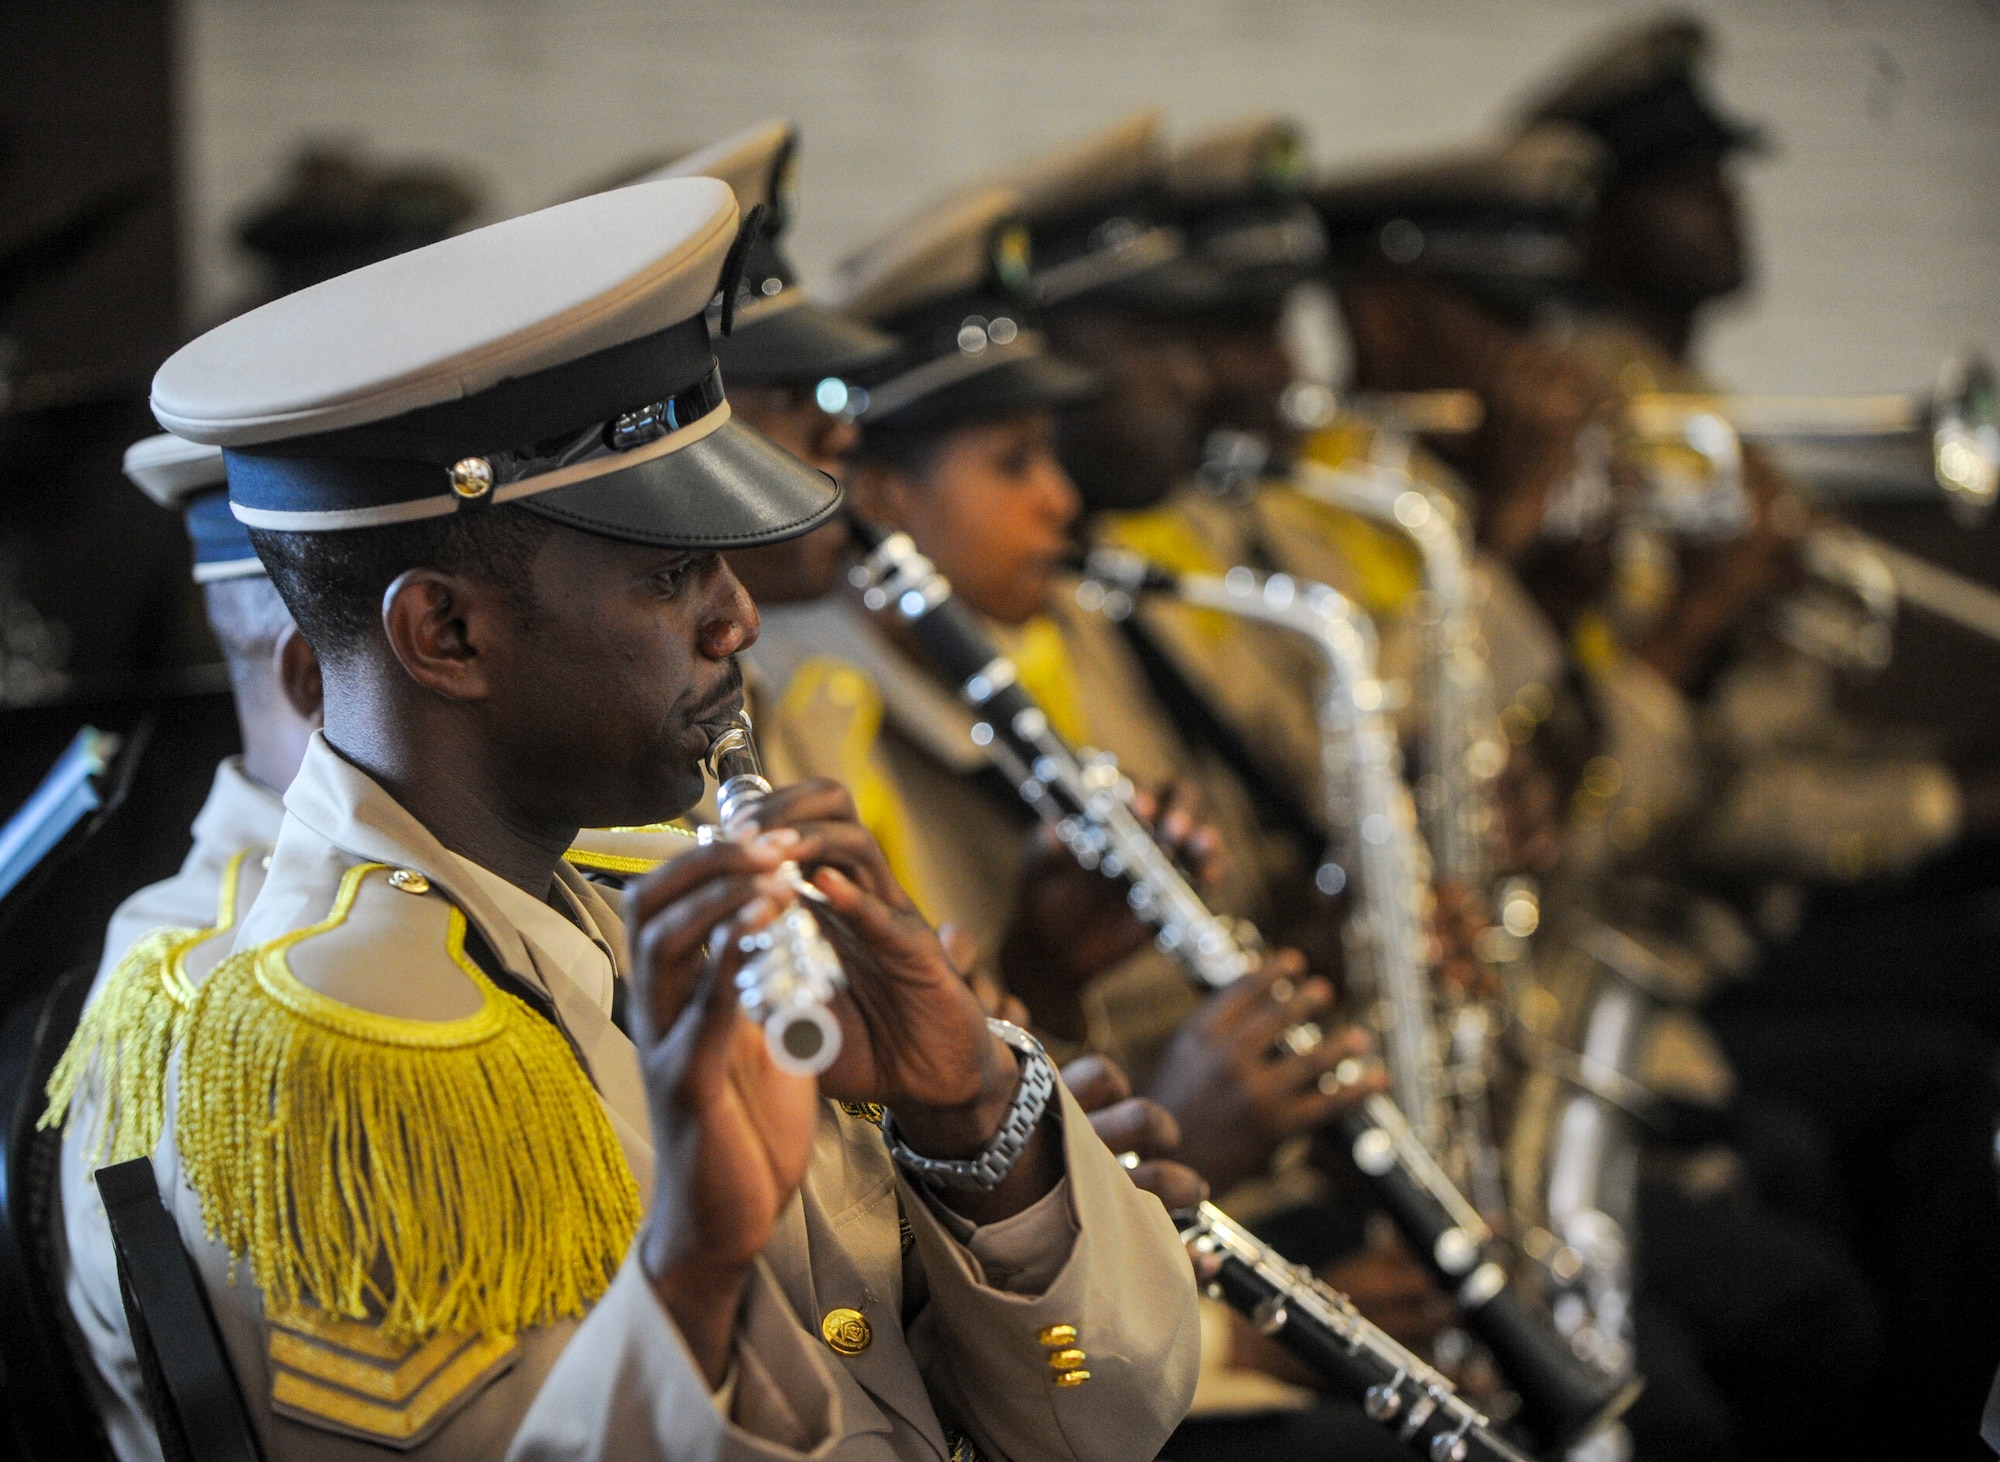 Members of the Rwanda Defence Force band play music at the African Partnership Flight Rwanda opening ceremony in Kigali, Rwanda, March 4, 2019. The APF program is intended to build strong, transparent partnerships that enhance regional stability and security. APF Rwanda's focus is on sharing best practices for flight, ground, and weapon safety. (U.S. Air Force photo by Tech. Sgt. Timothy Moore)